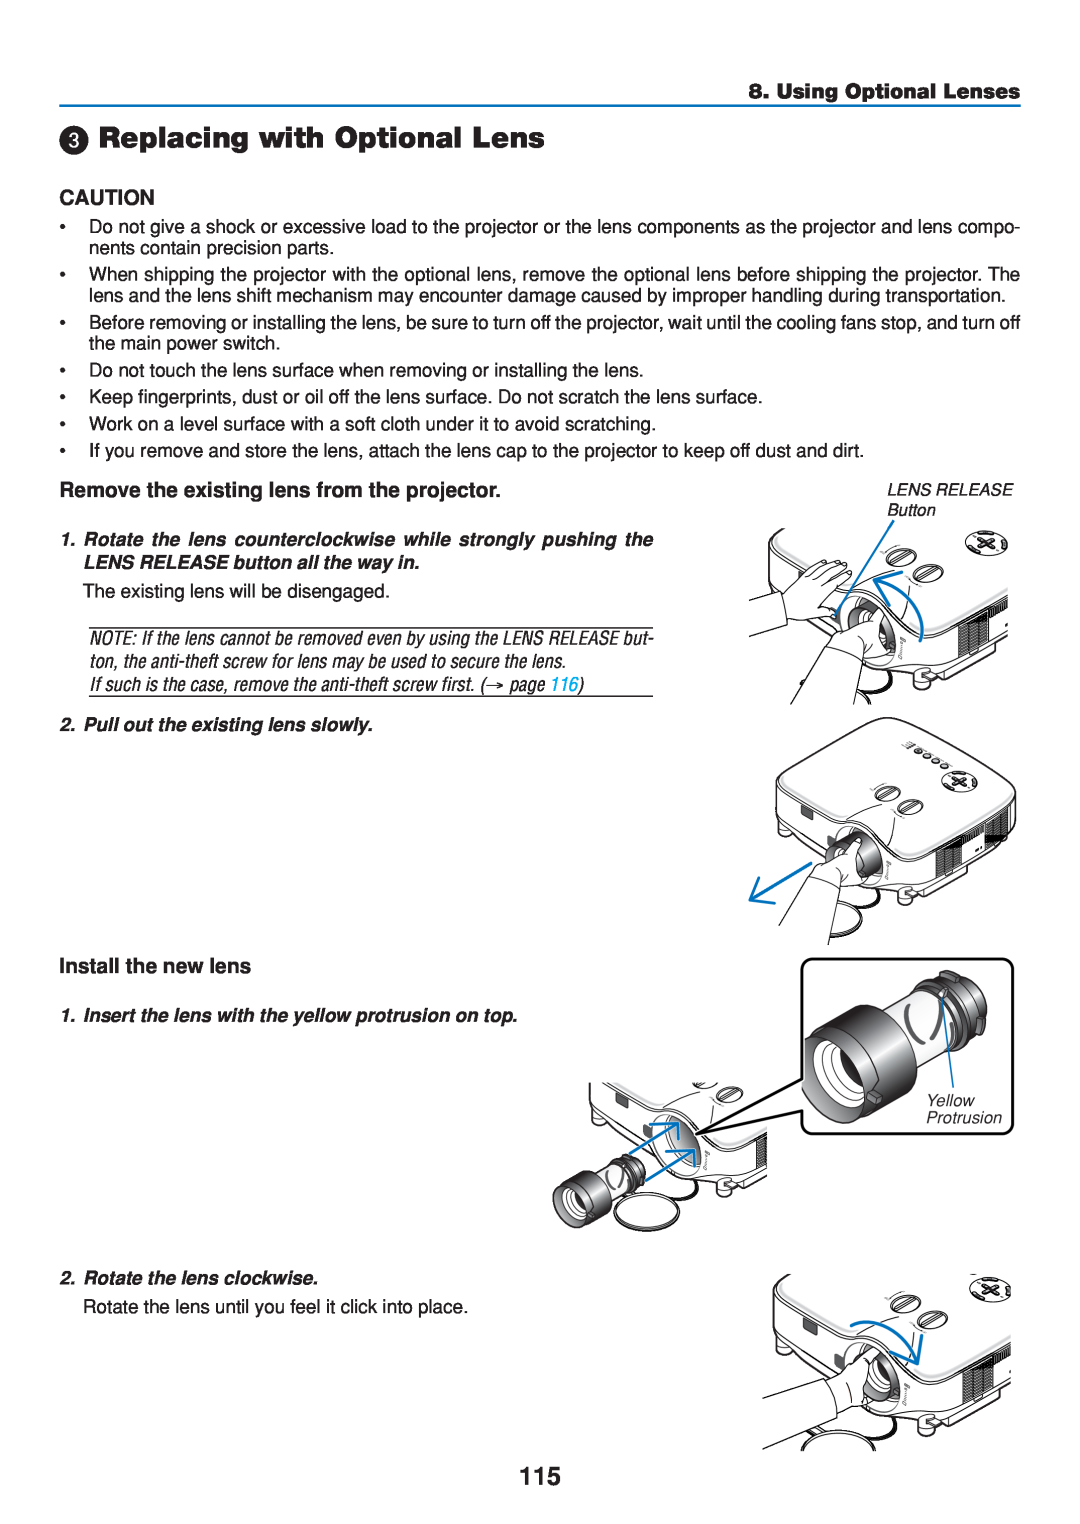 Dukane 8808 user manual Replacing with Optional Lens, Remove the existing lens from the projector, Install the new lens 